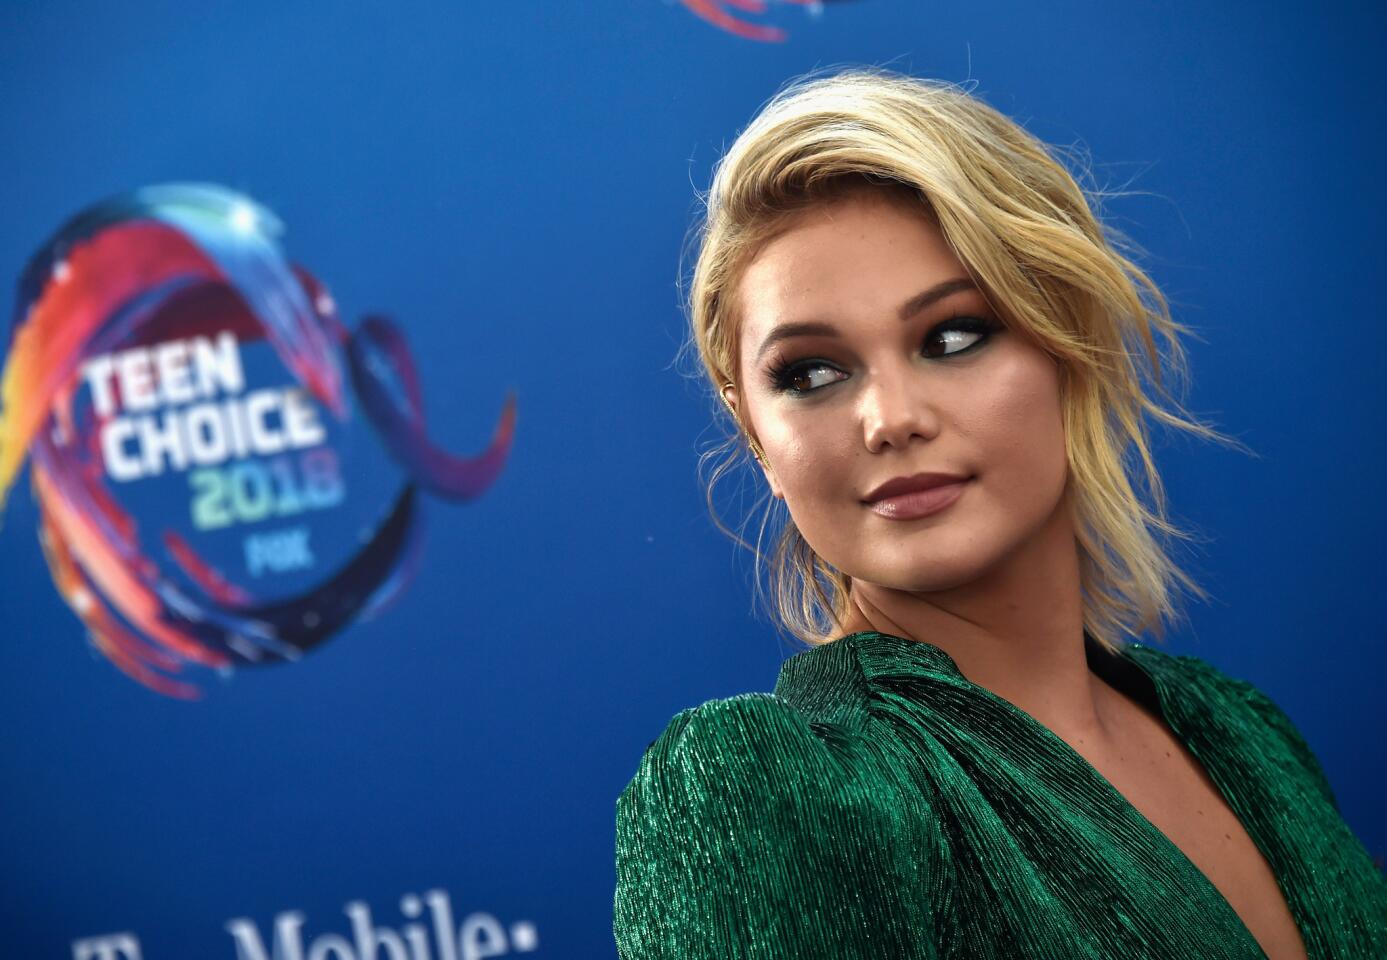 INGLEWOOD, CA - AUGUST 12: Olivia Holt attends FOX's Teen Choice Awards at The Forum on August 12, 2018 in Inglewood, California.